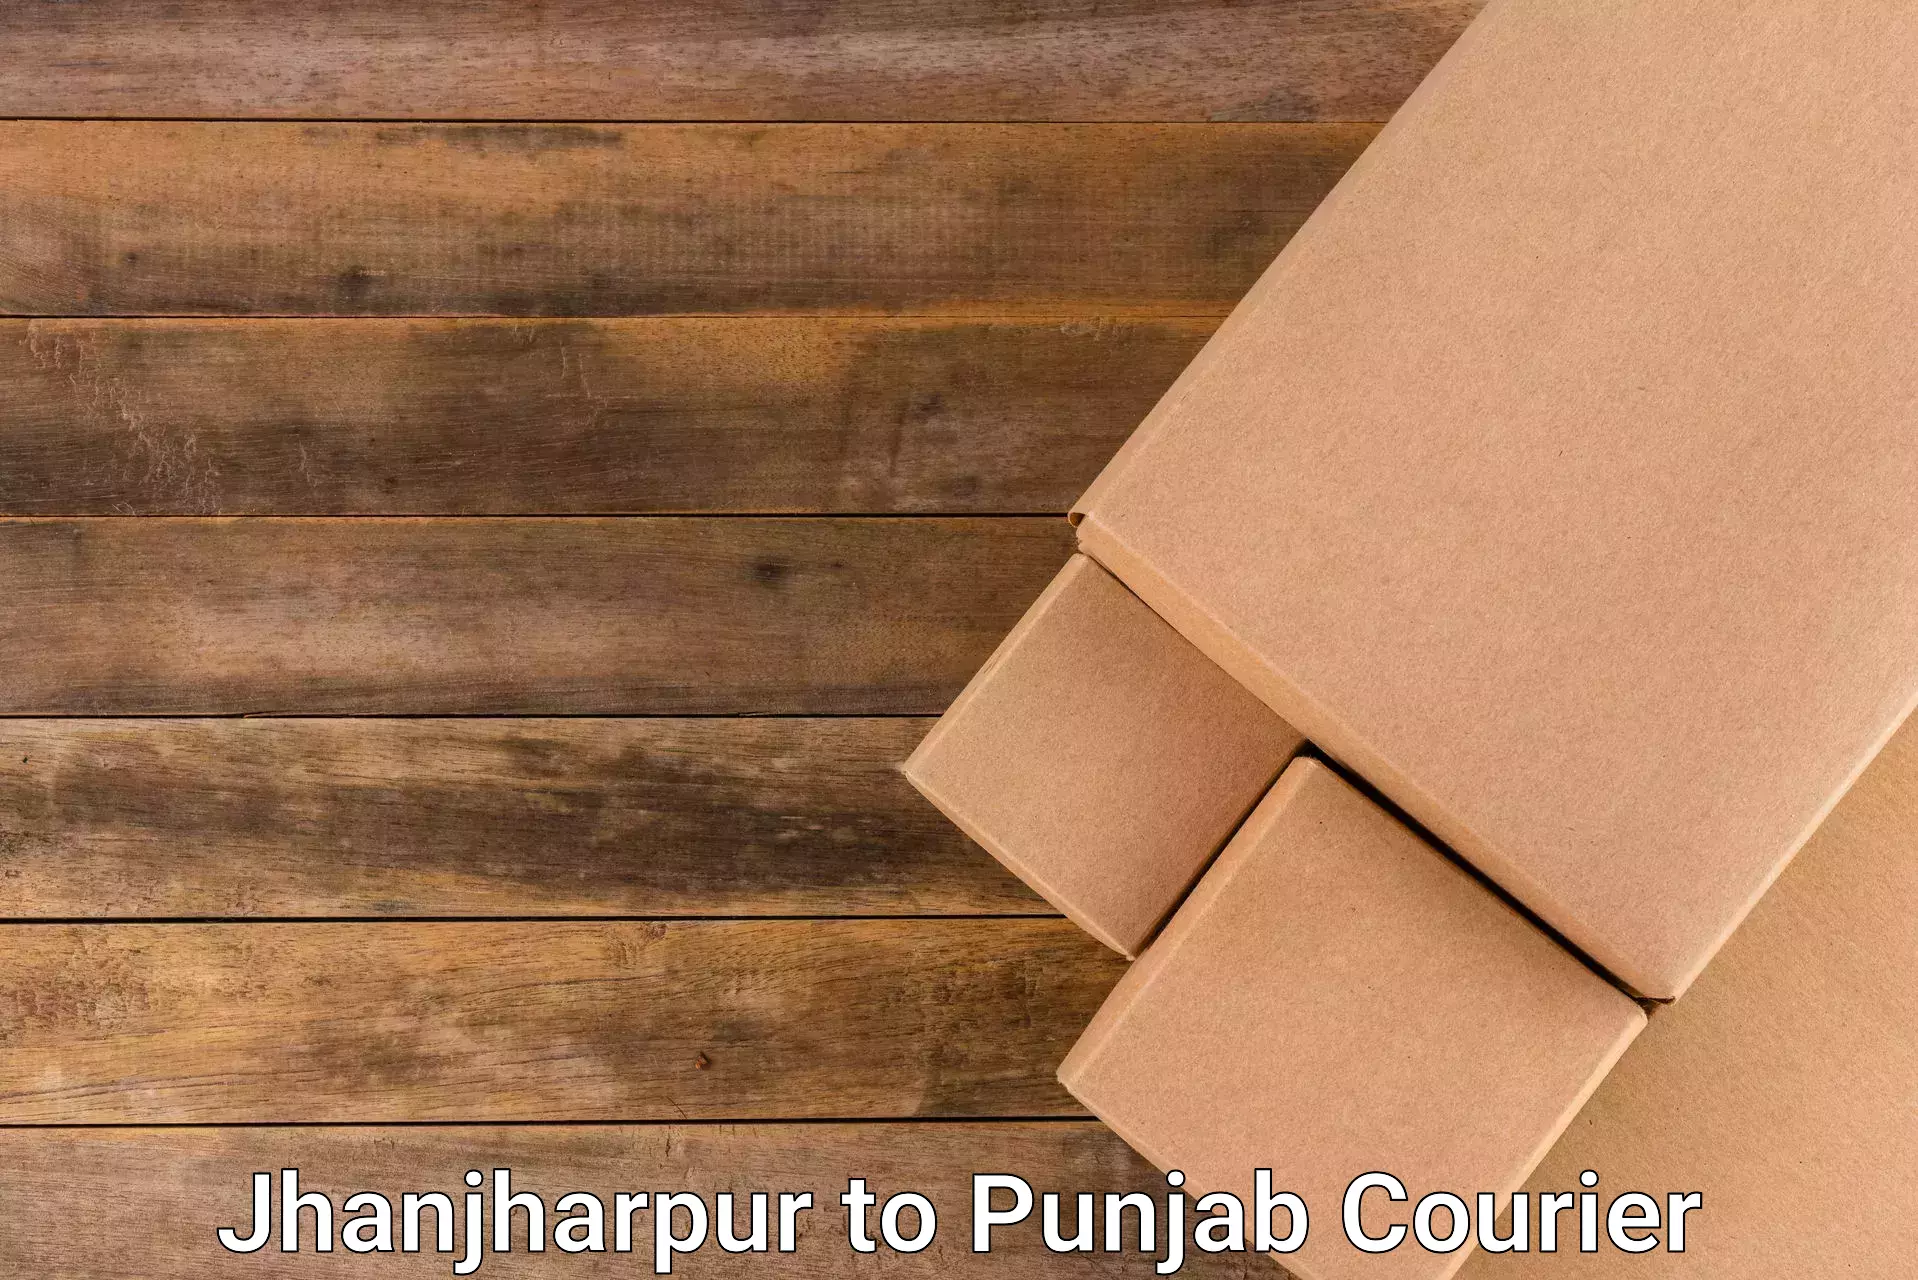 Express delivery capabilities Jhanjharpur to Ropar